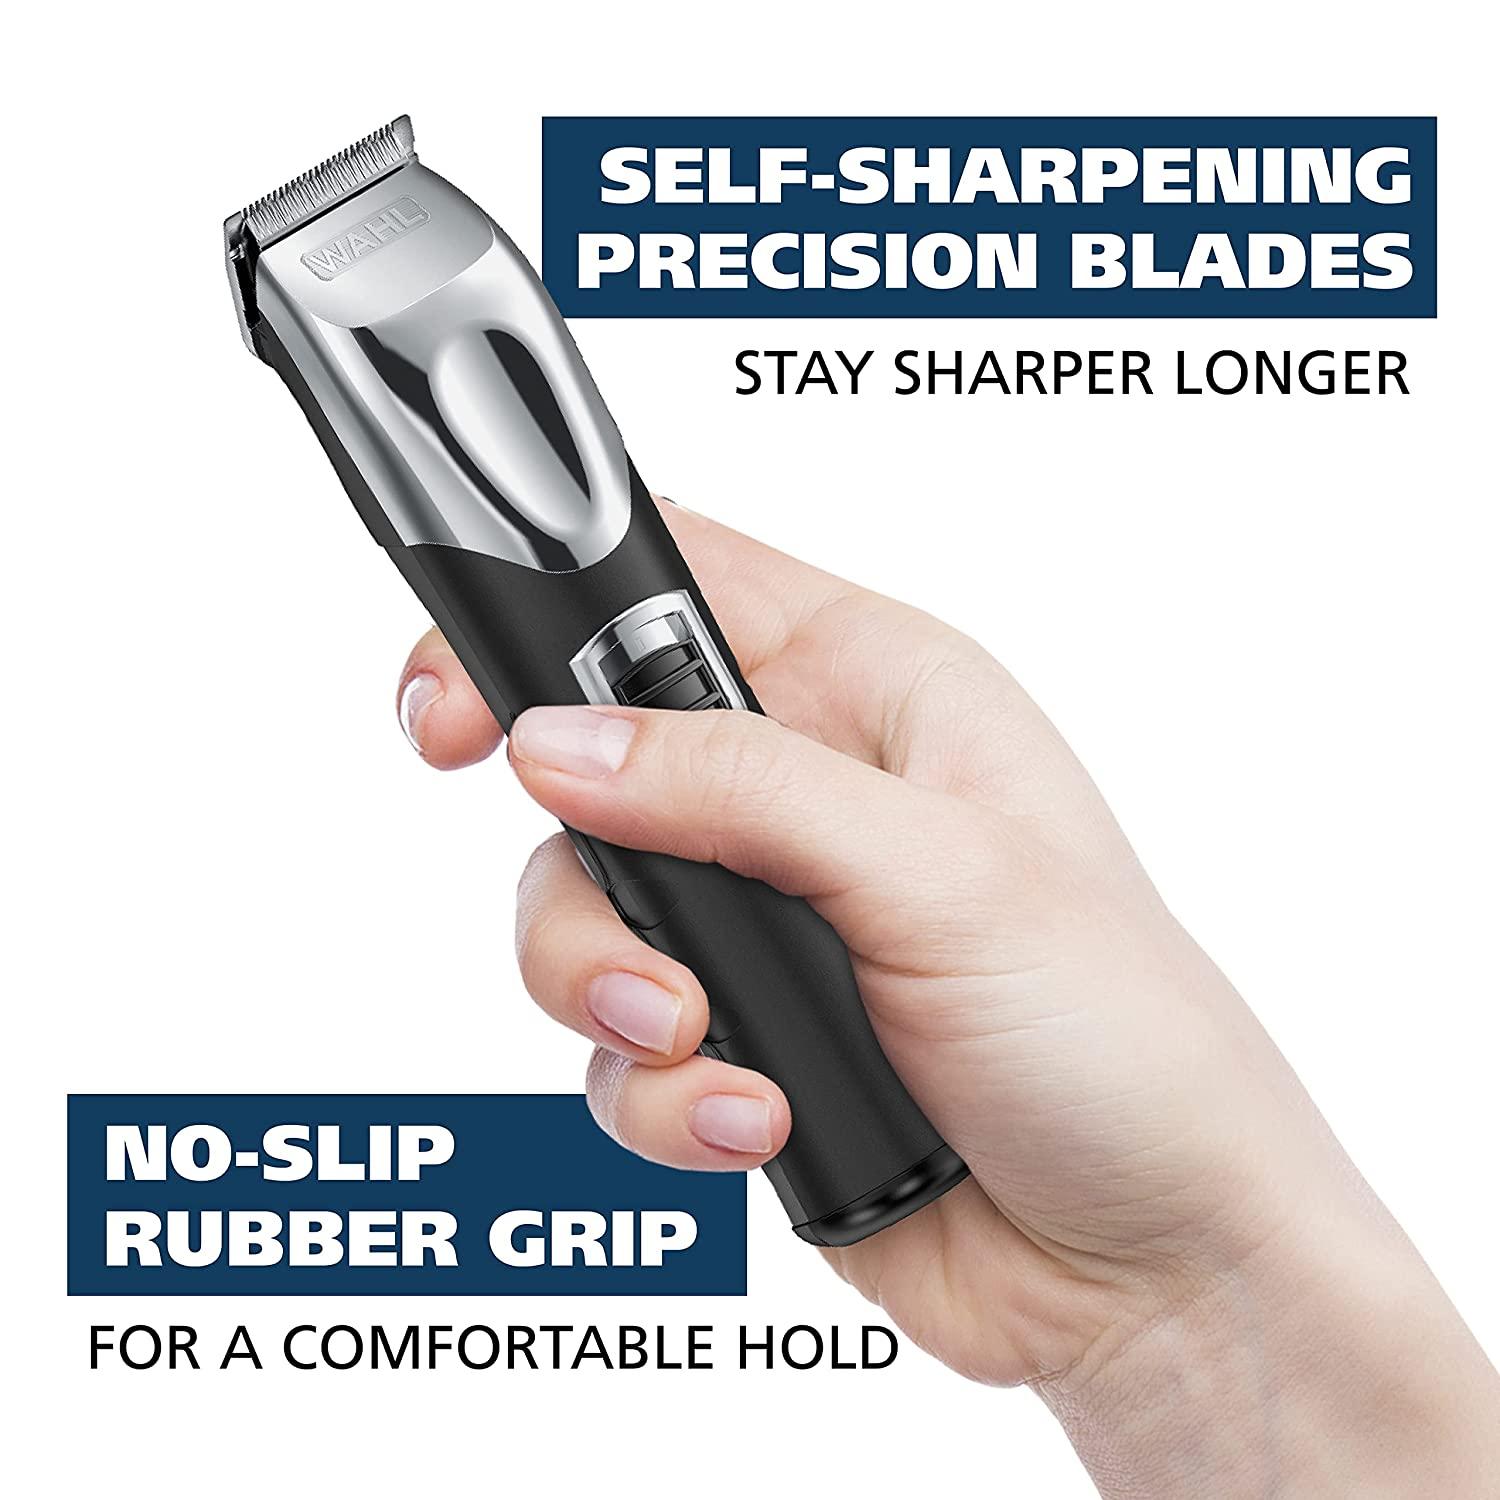 Wahl Rechargeable Lithium-Ion All-in-One Beard Trimmer, Shaver, And  Detailing Kit For Body Grooming At Home Model 9854-600B メンズグルーミング |  bitesofbangkok.com